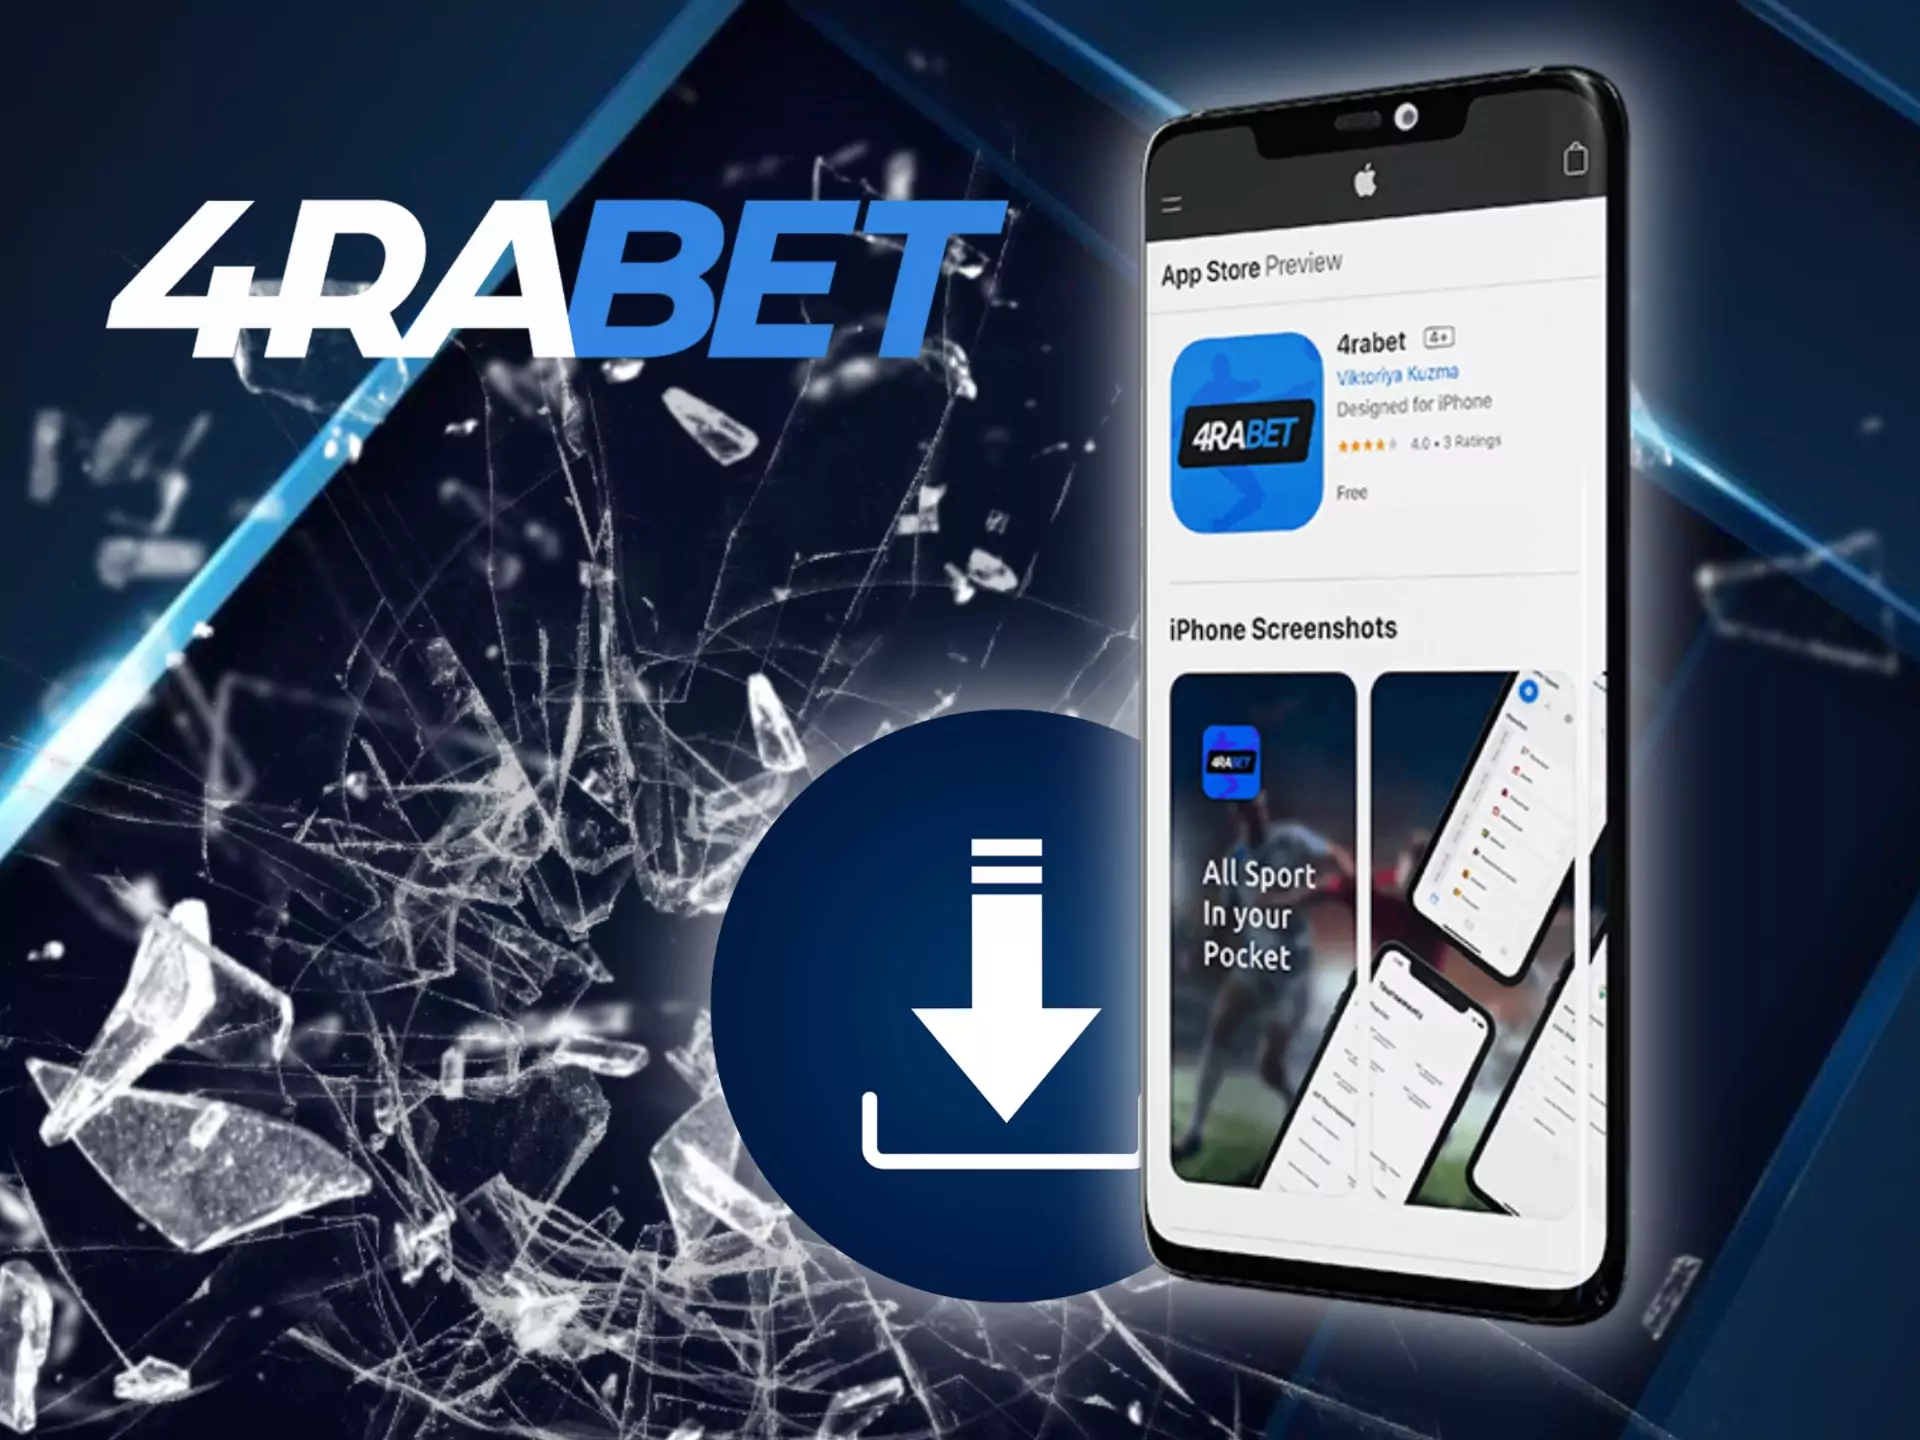 Find a specific button on the 4rabet official website and download the iOS app.